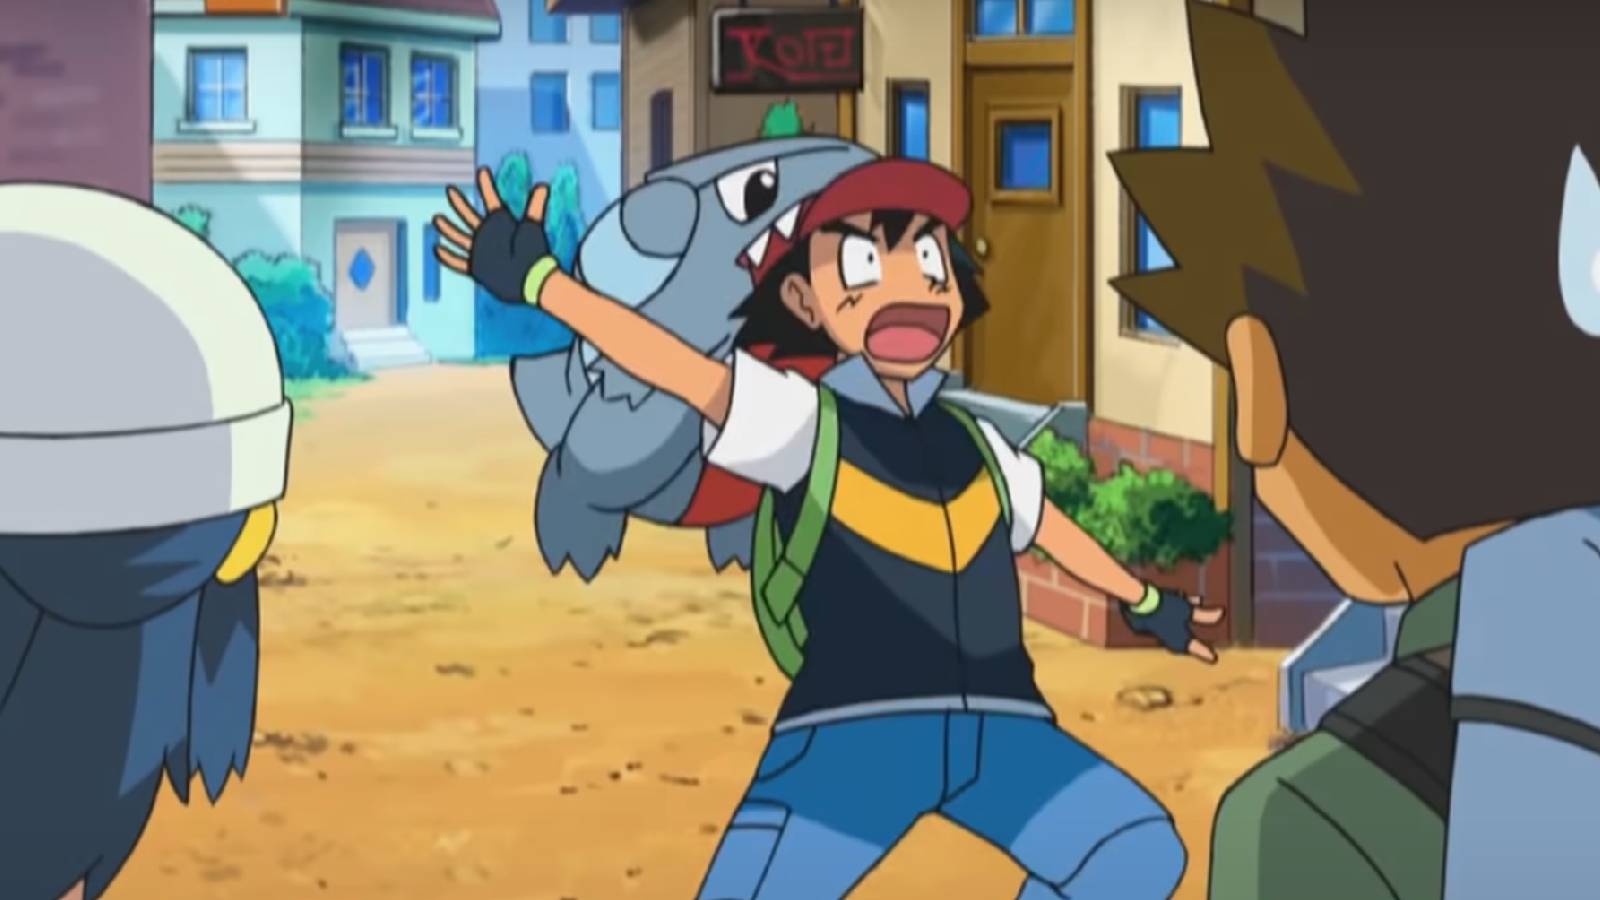 A screenshot from the Pokemon anime shows Ash ketchum being bit on the head by the Pokemon gible